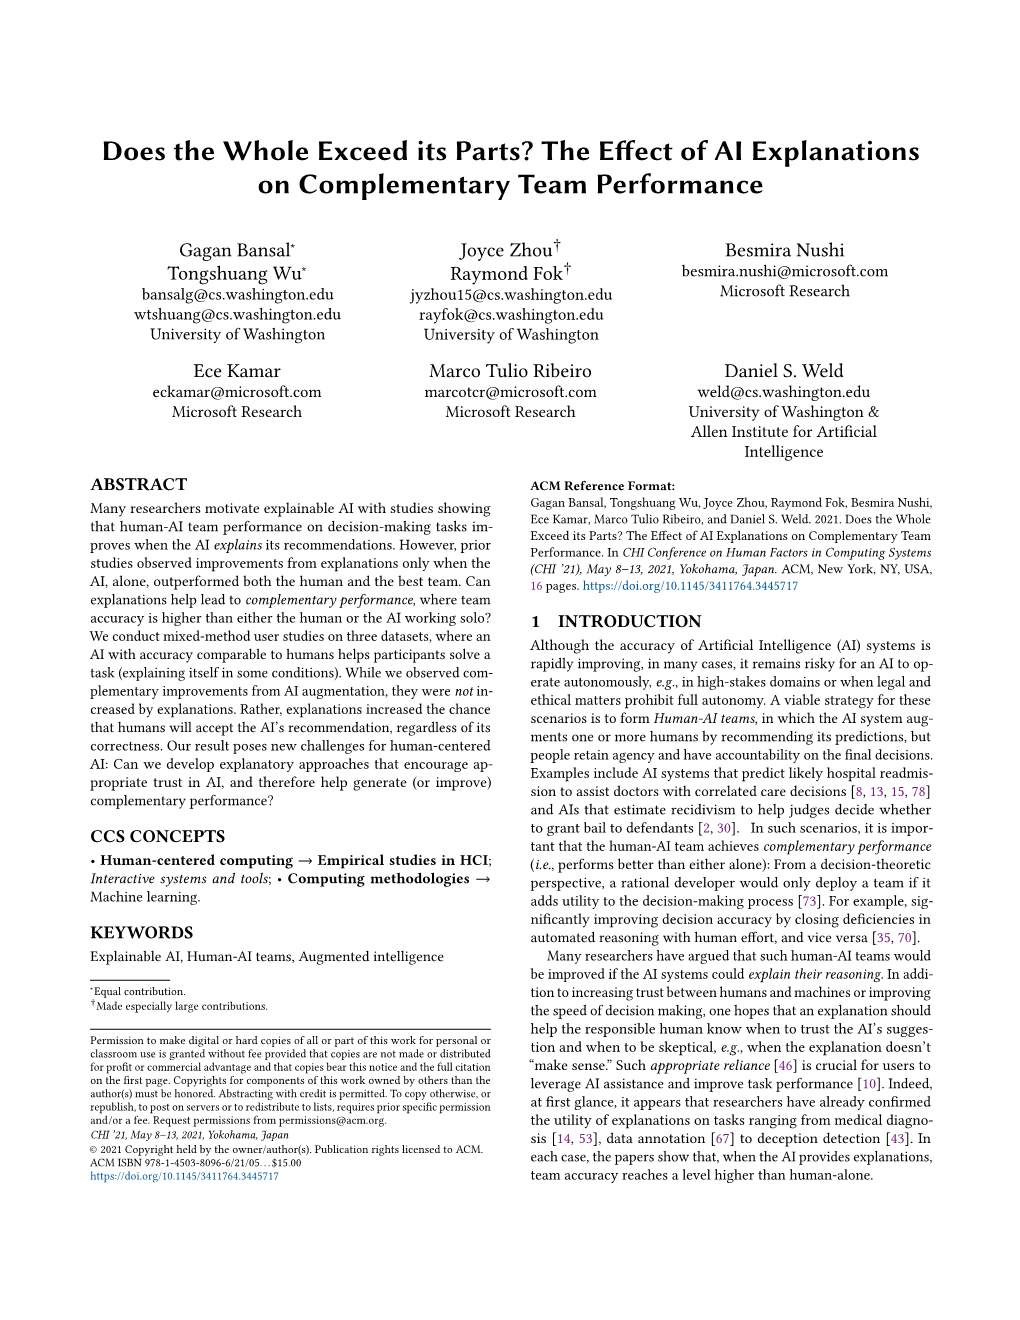 The Effect of AI Explanations on Complementary Team Performance